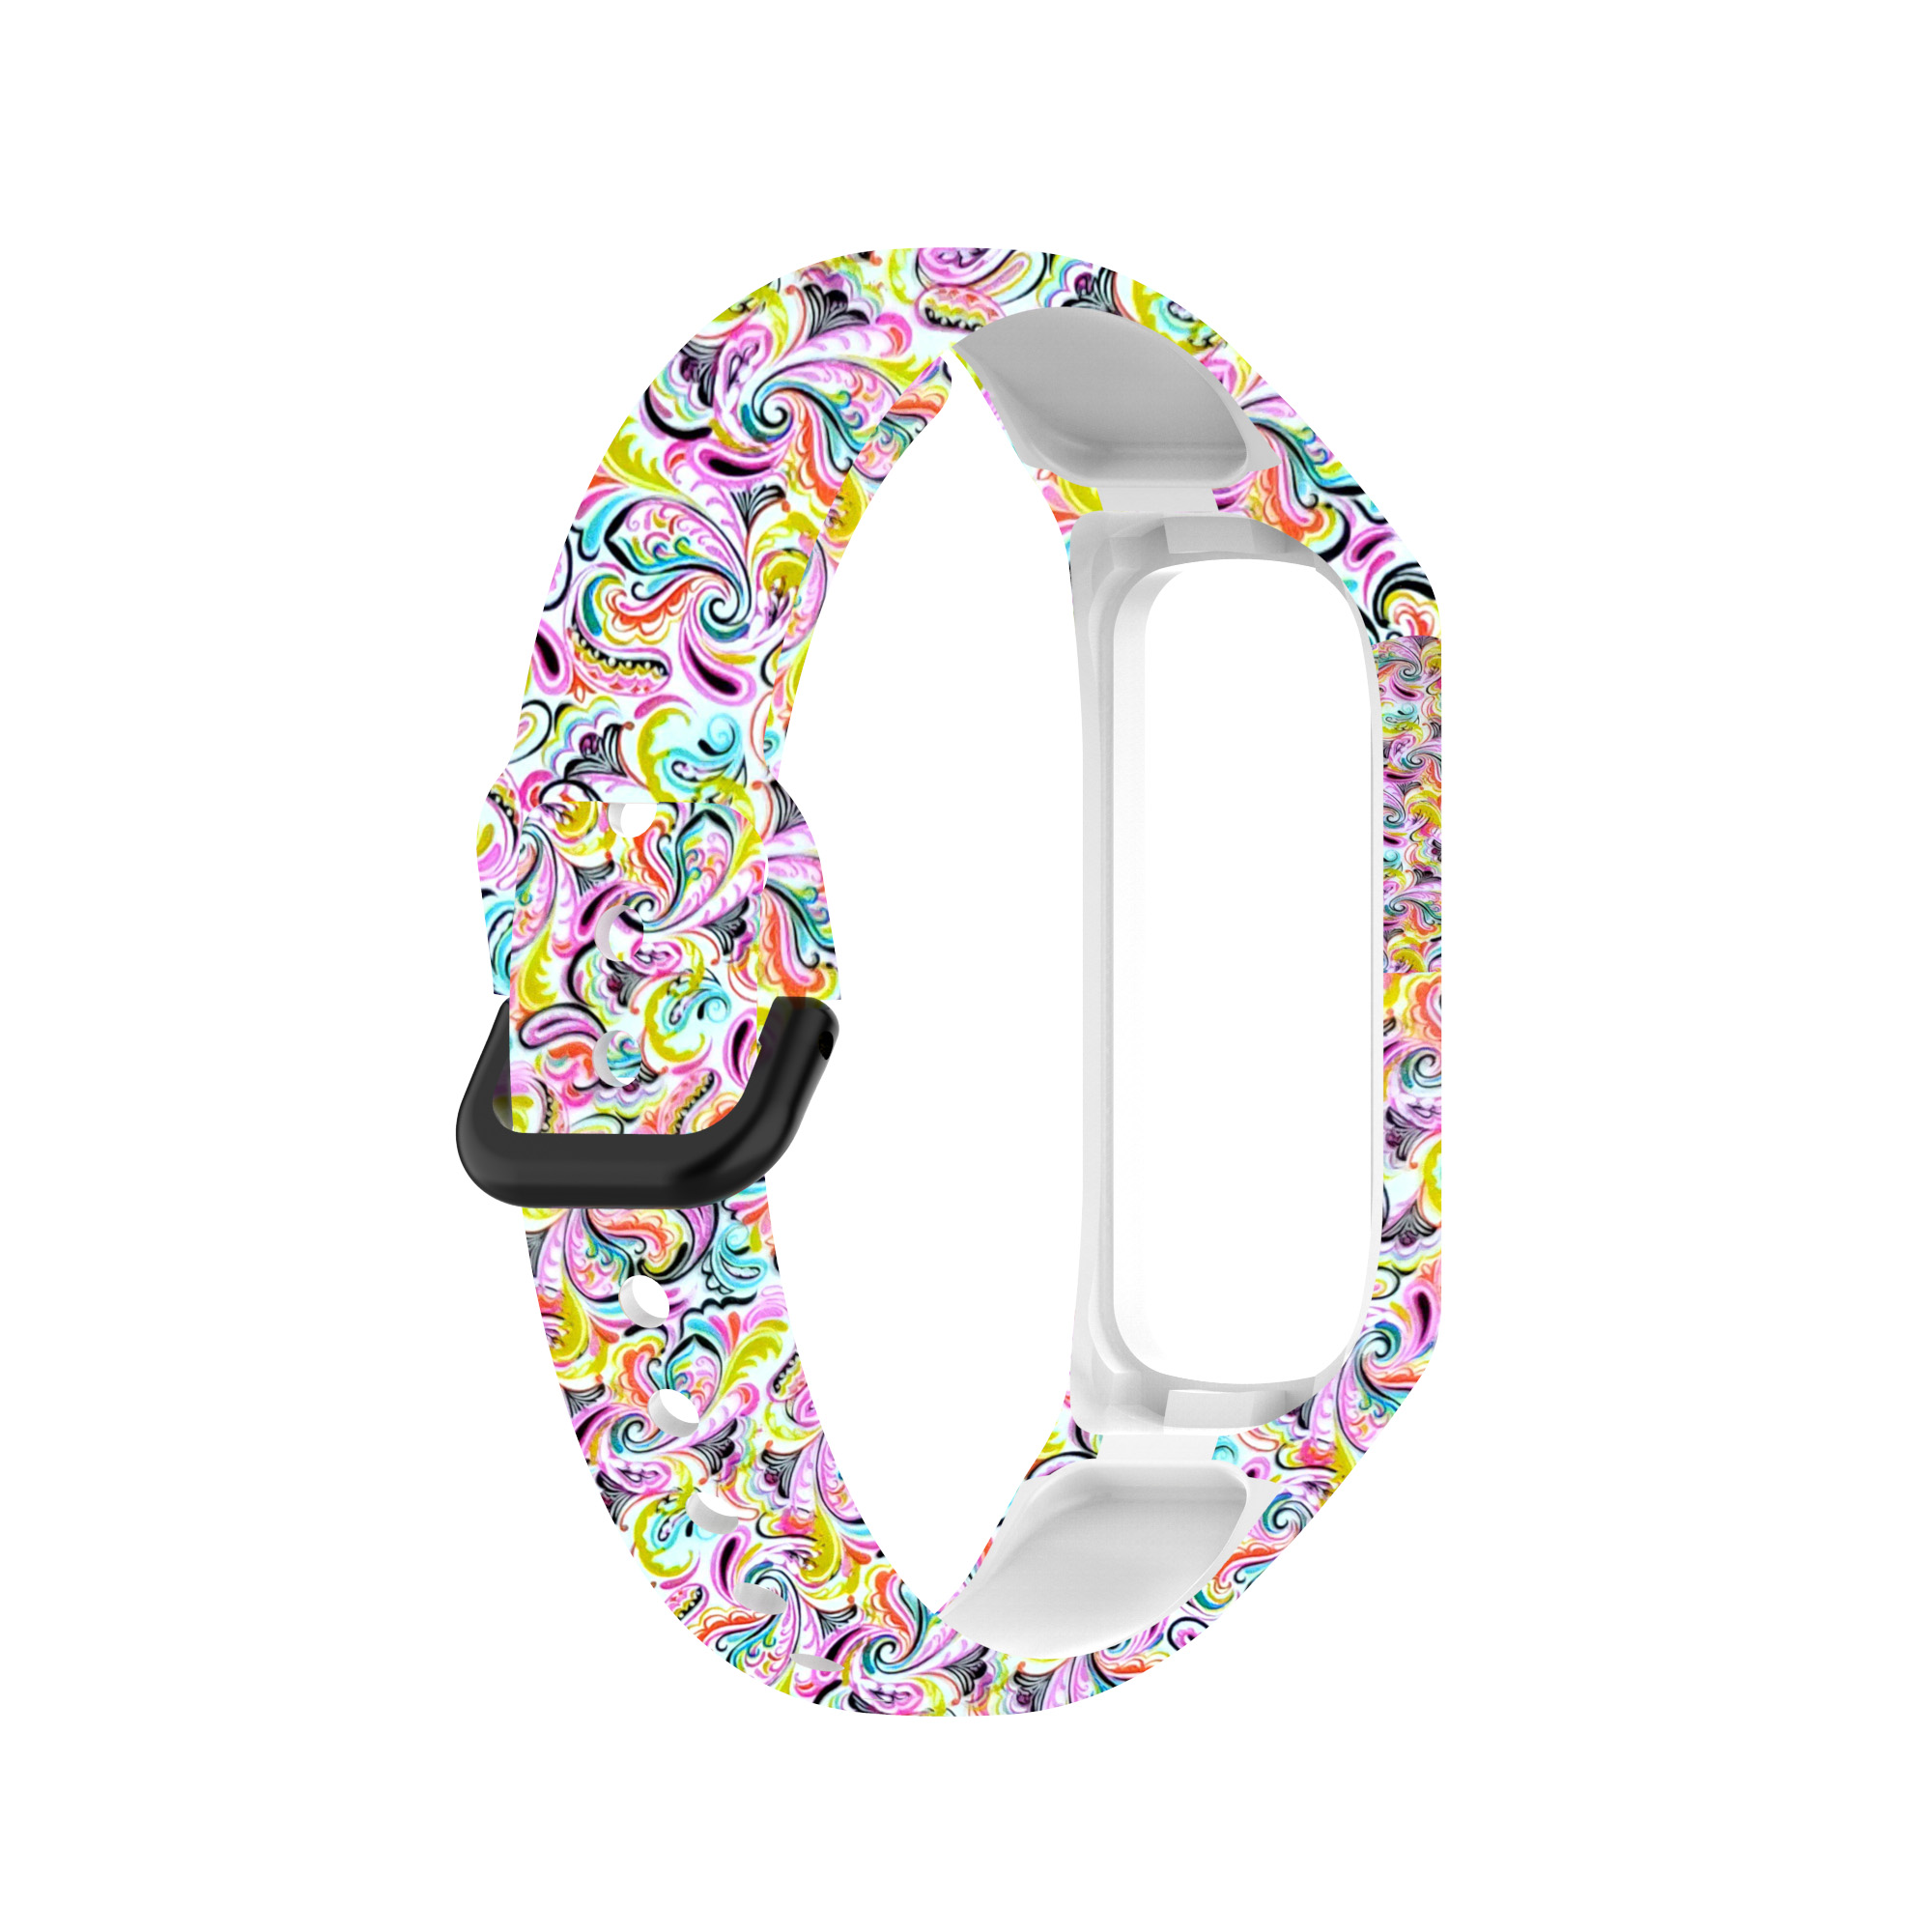 Bakeey-Printed-Pattern-Stainless-Steel-Buckle-Smart-watch-Band-Replacement-Strap-For-Samsung-Galaxy--1806217-14